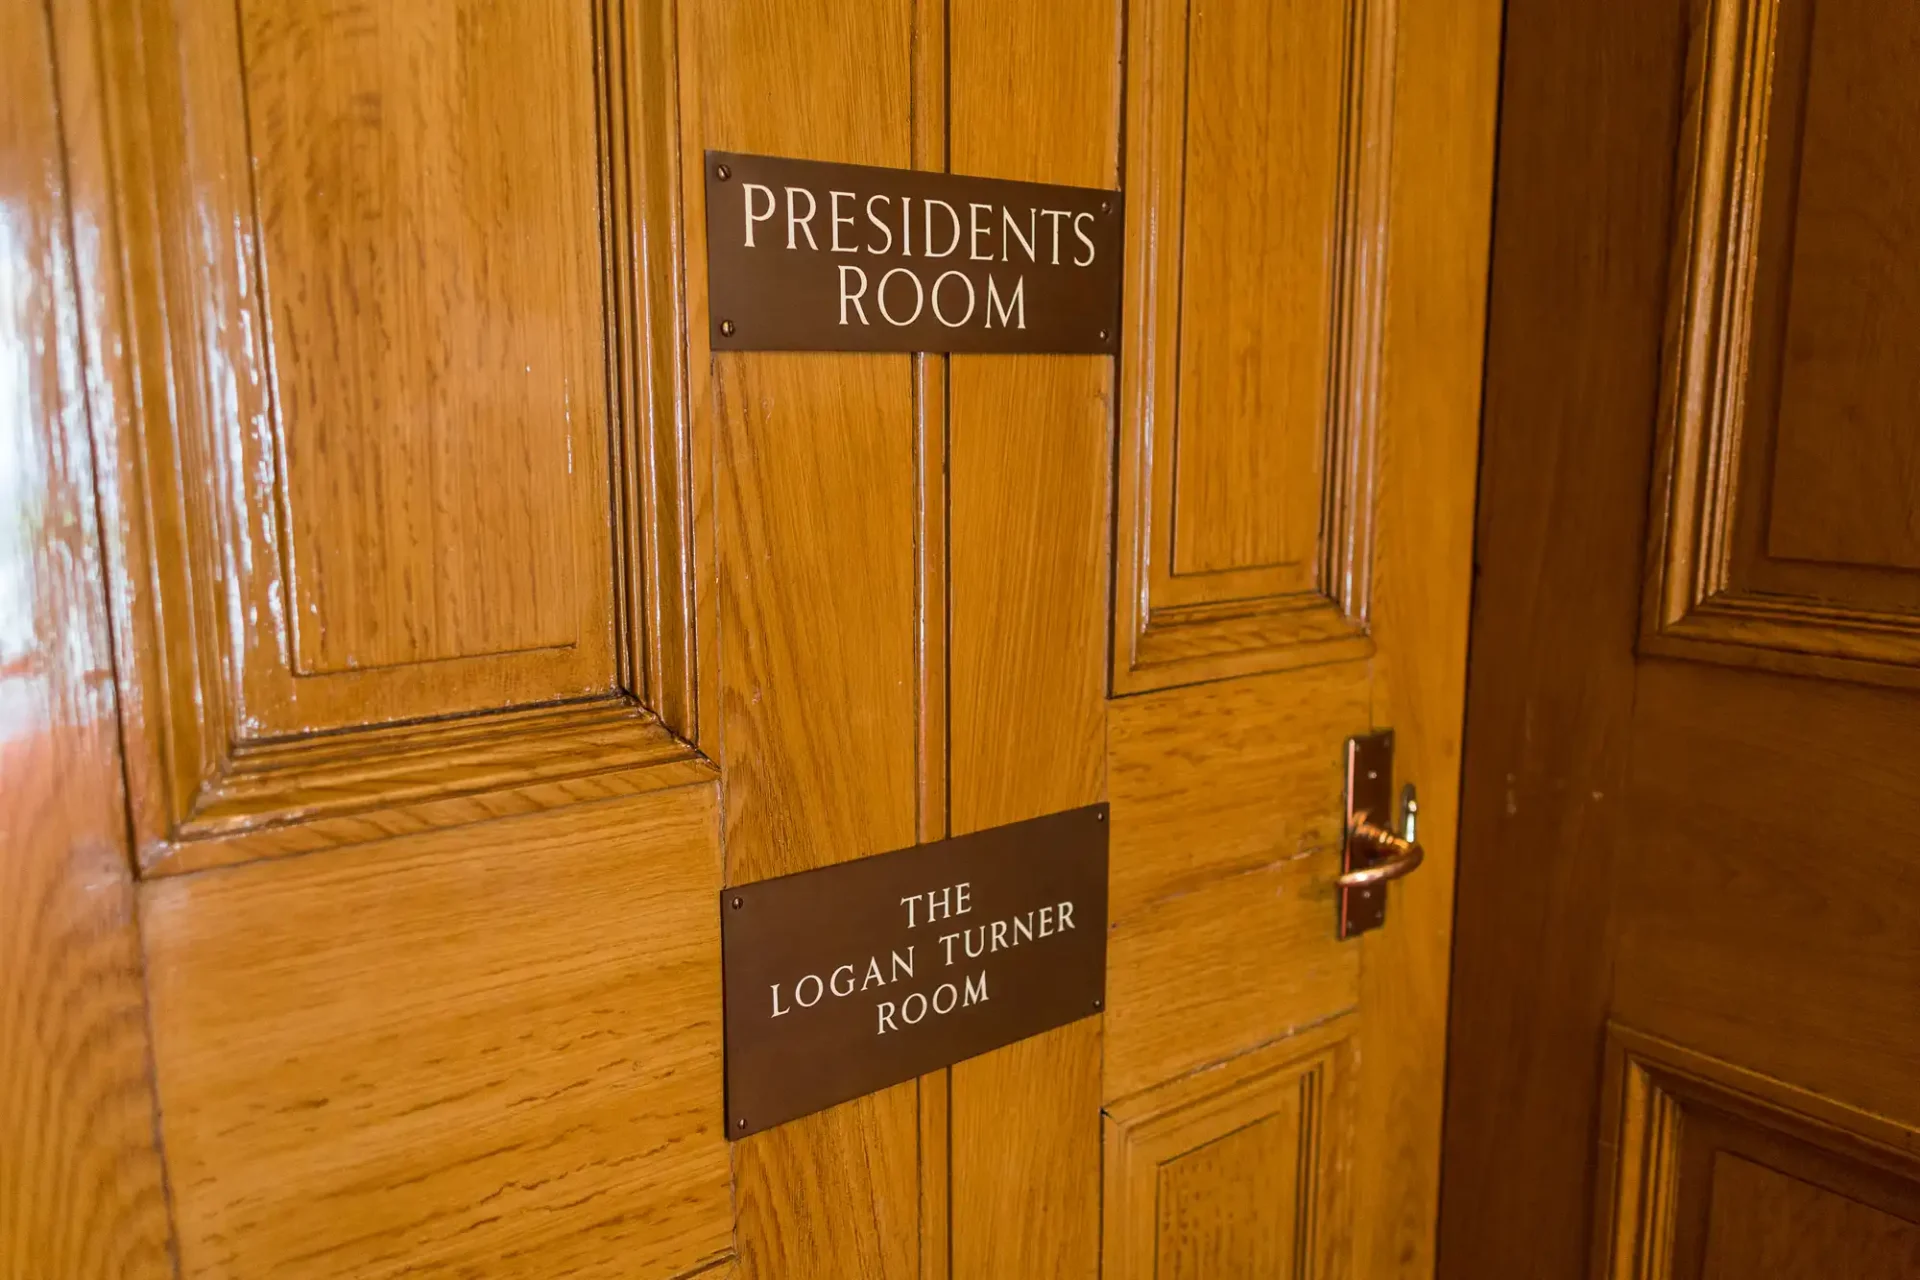 A wooden door with two signs reading "presidents room" and "the logan turner room," featuring a stainless steel handle.